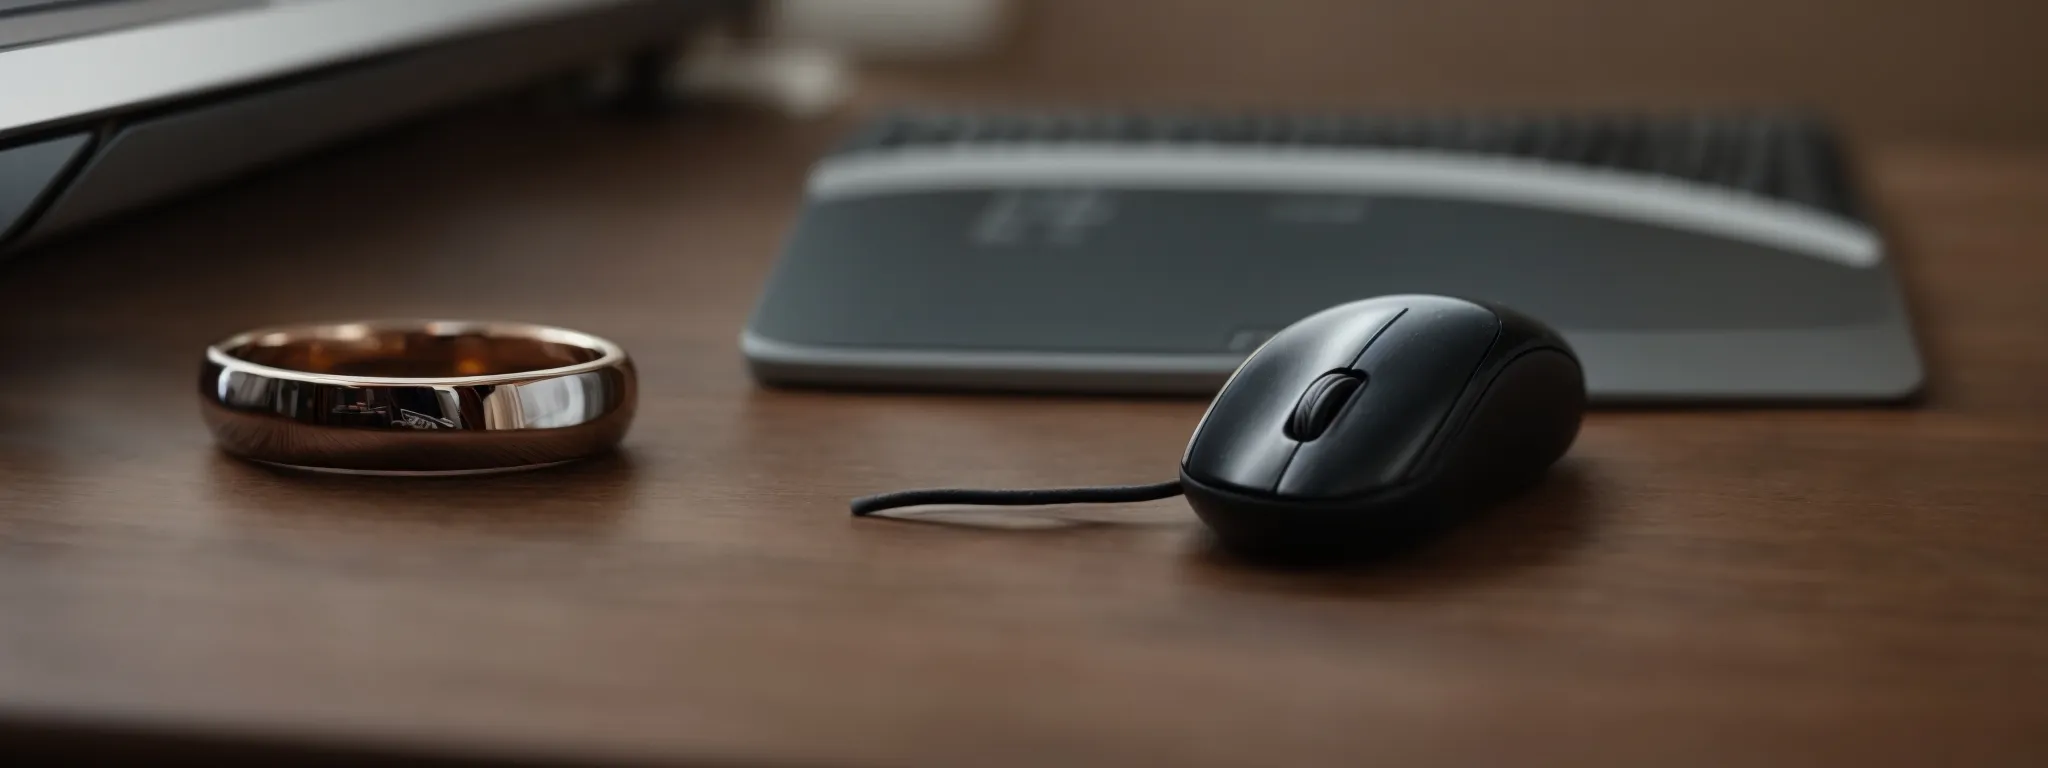 a wedding ring beside a computer mouse on a desk.